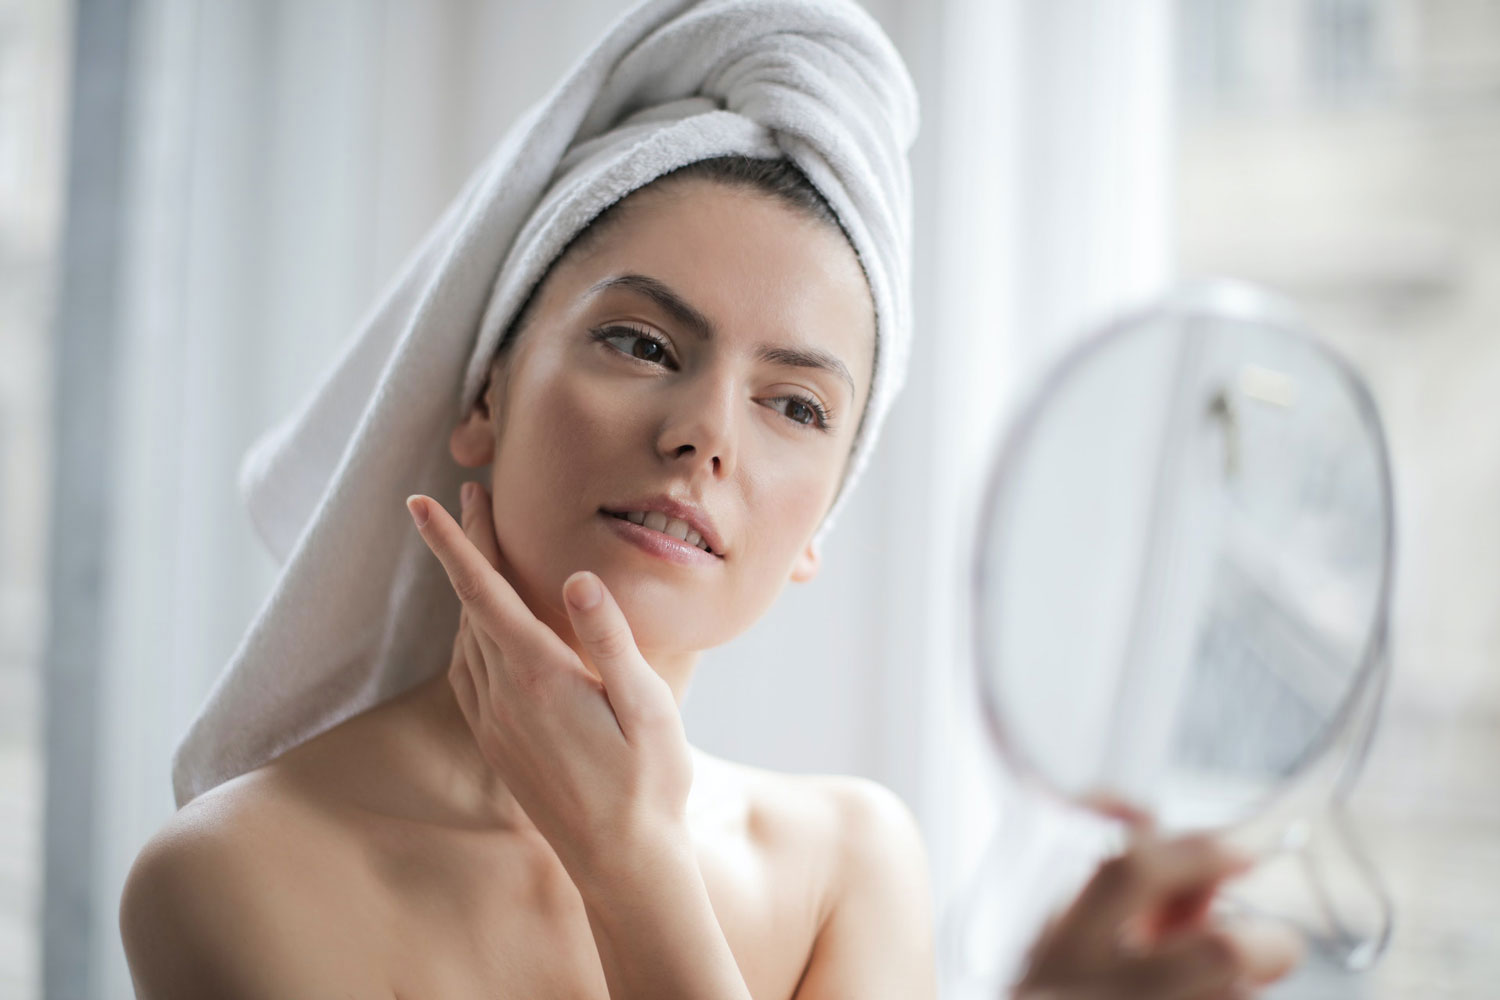 photo of woman admiring her skin while she looks into a mirror she is holding